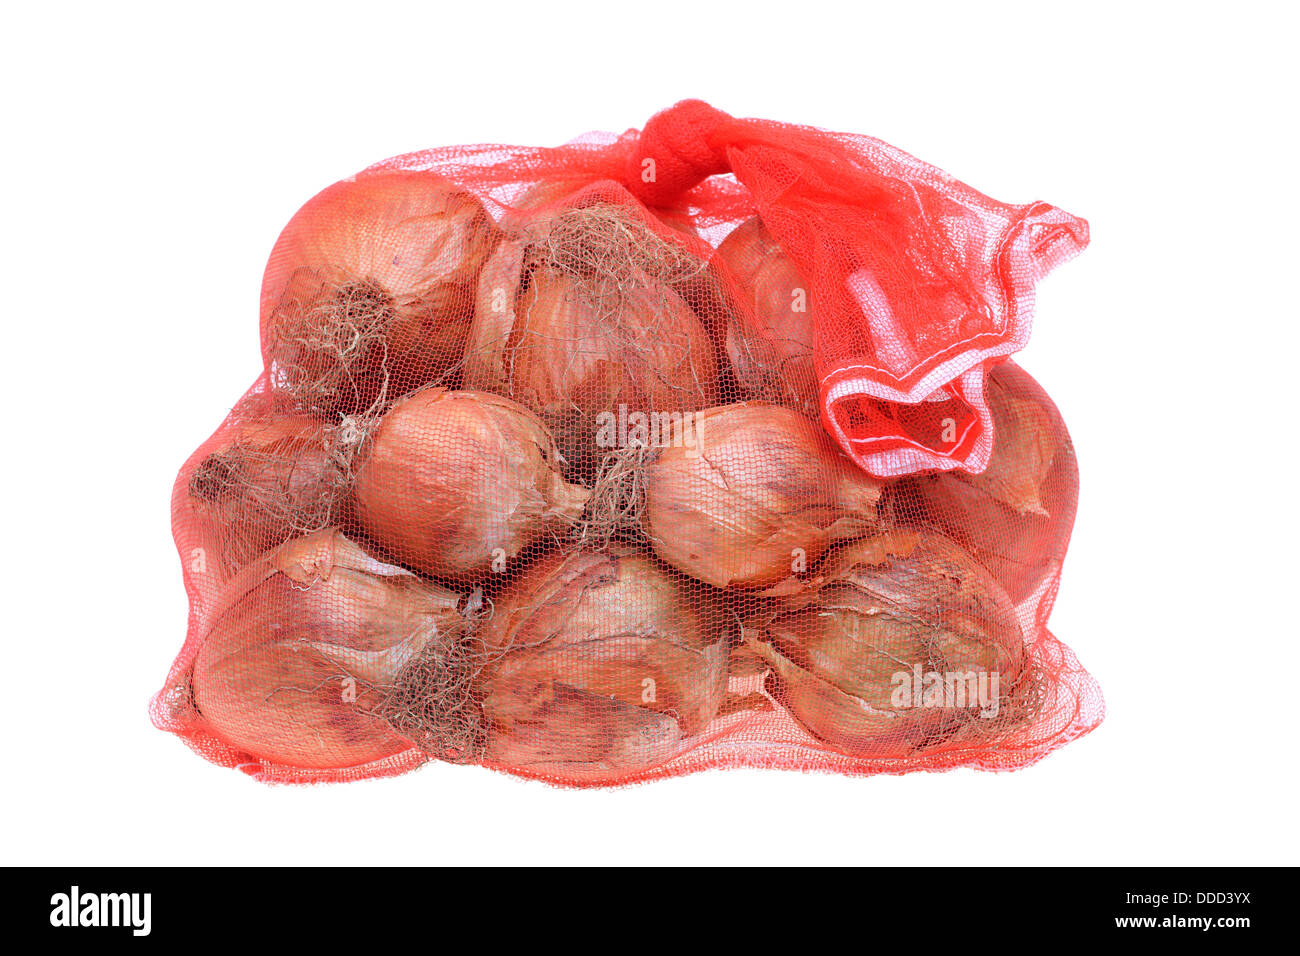 Fresh onions in package stock photo. Image of mesh, edible - 25055116